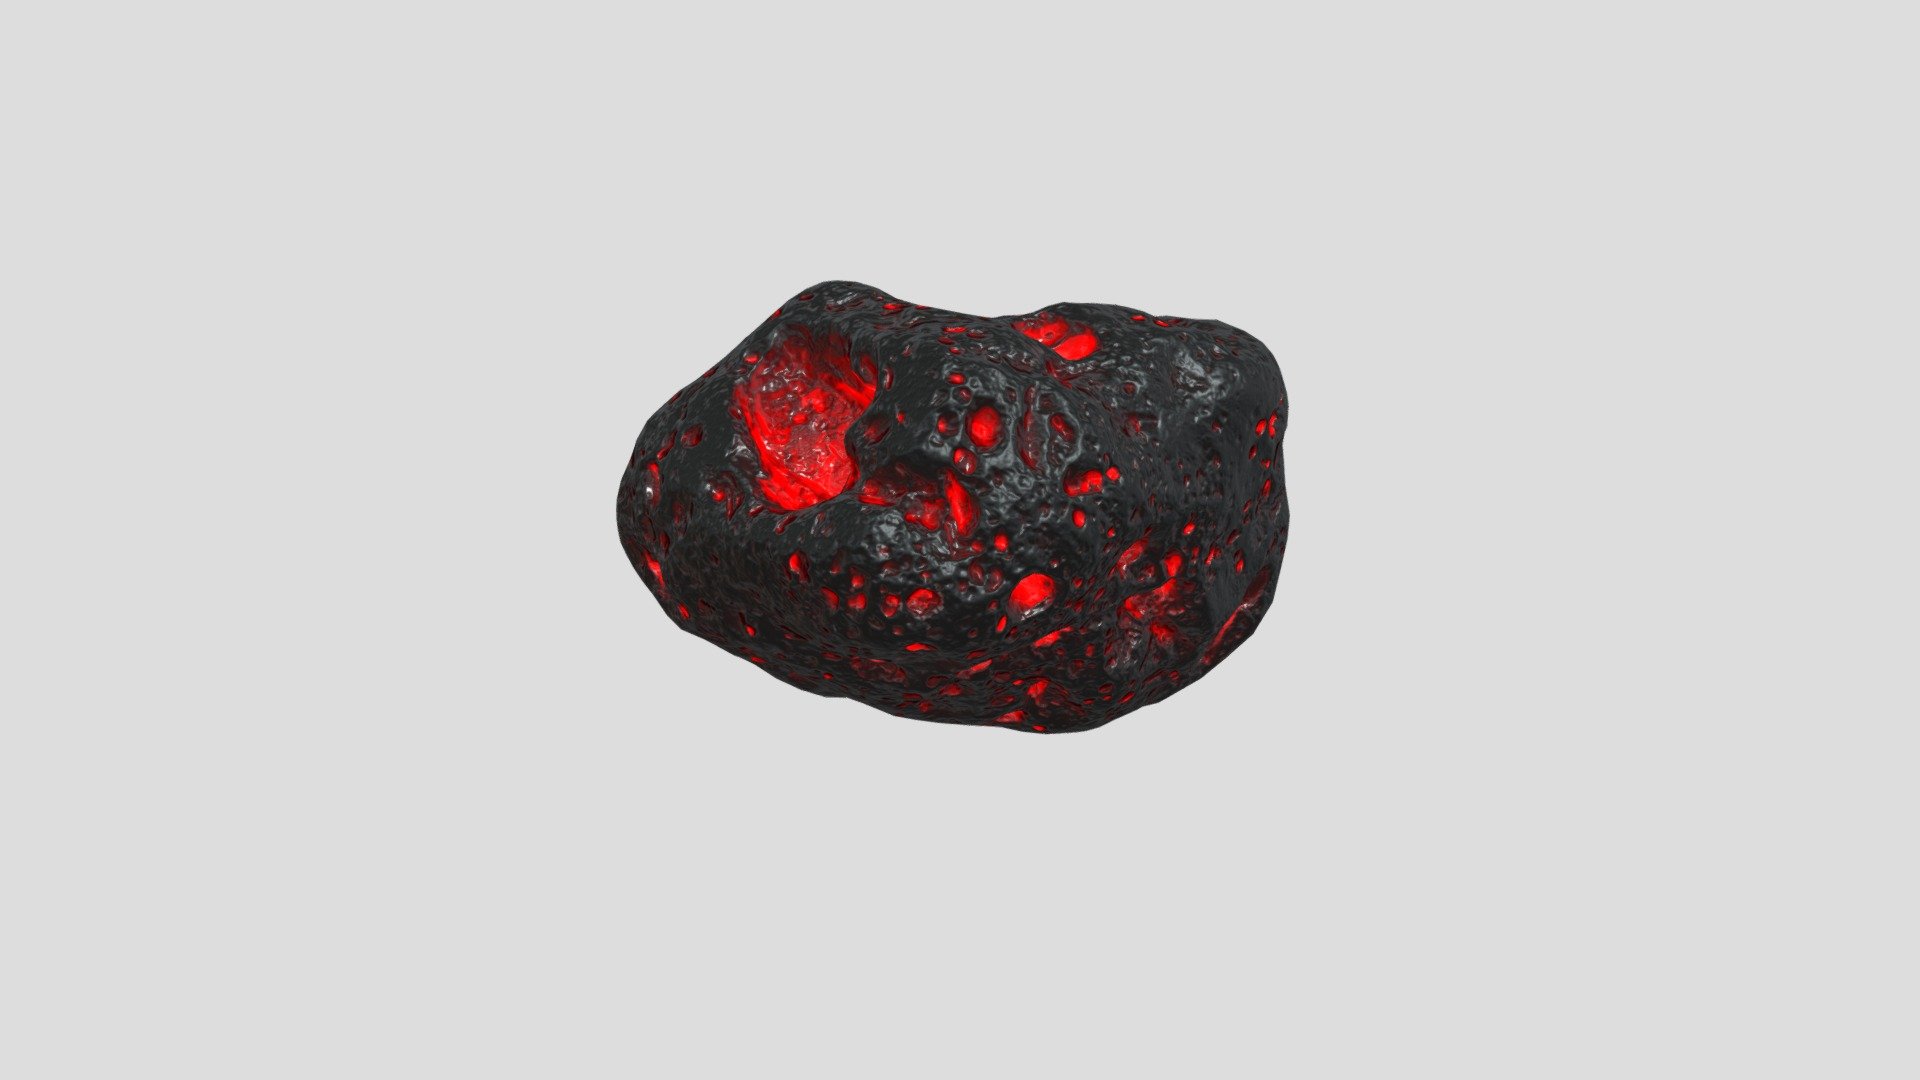 M error occurred 909999900099ERROR requisite Oooooo1999Z091O5A09A1 - Meteorite is me AND - 3D model by MeteoritePose9 3d model